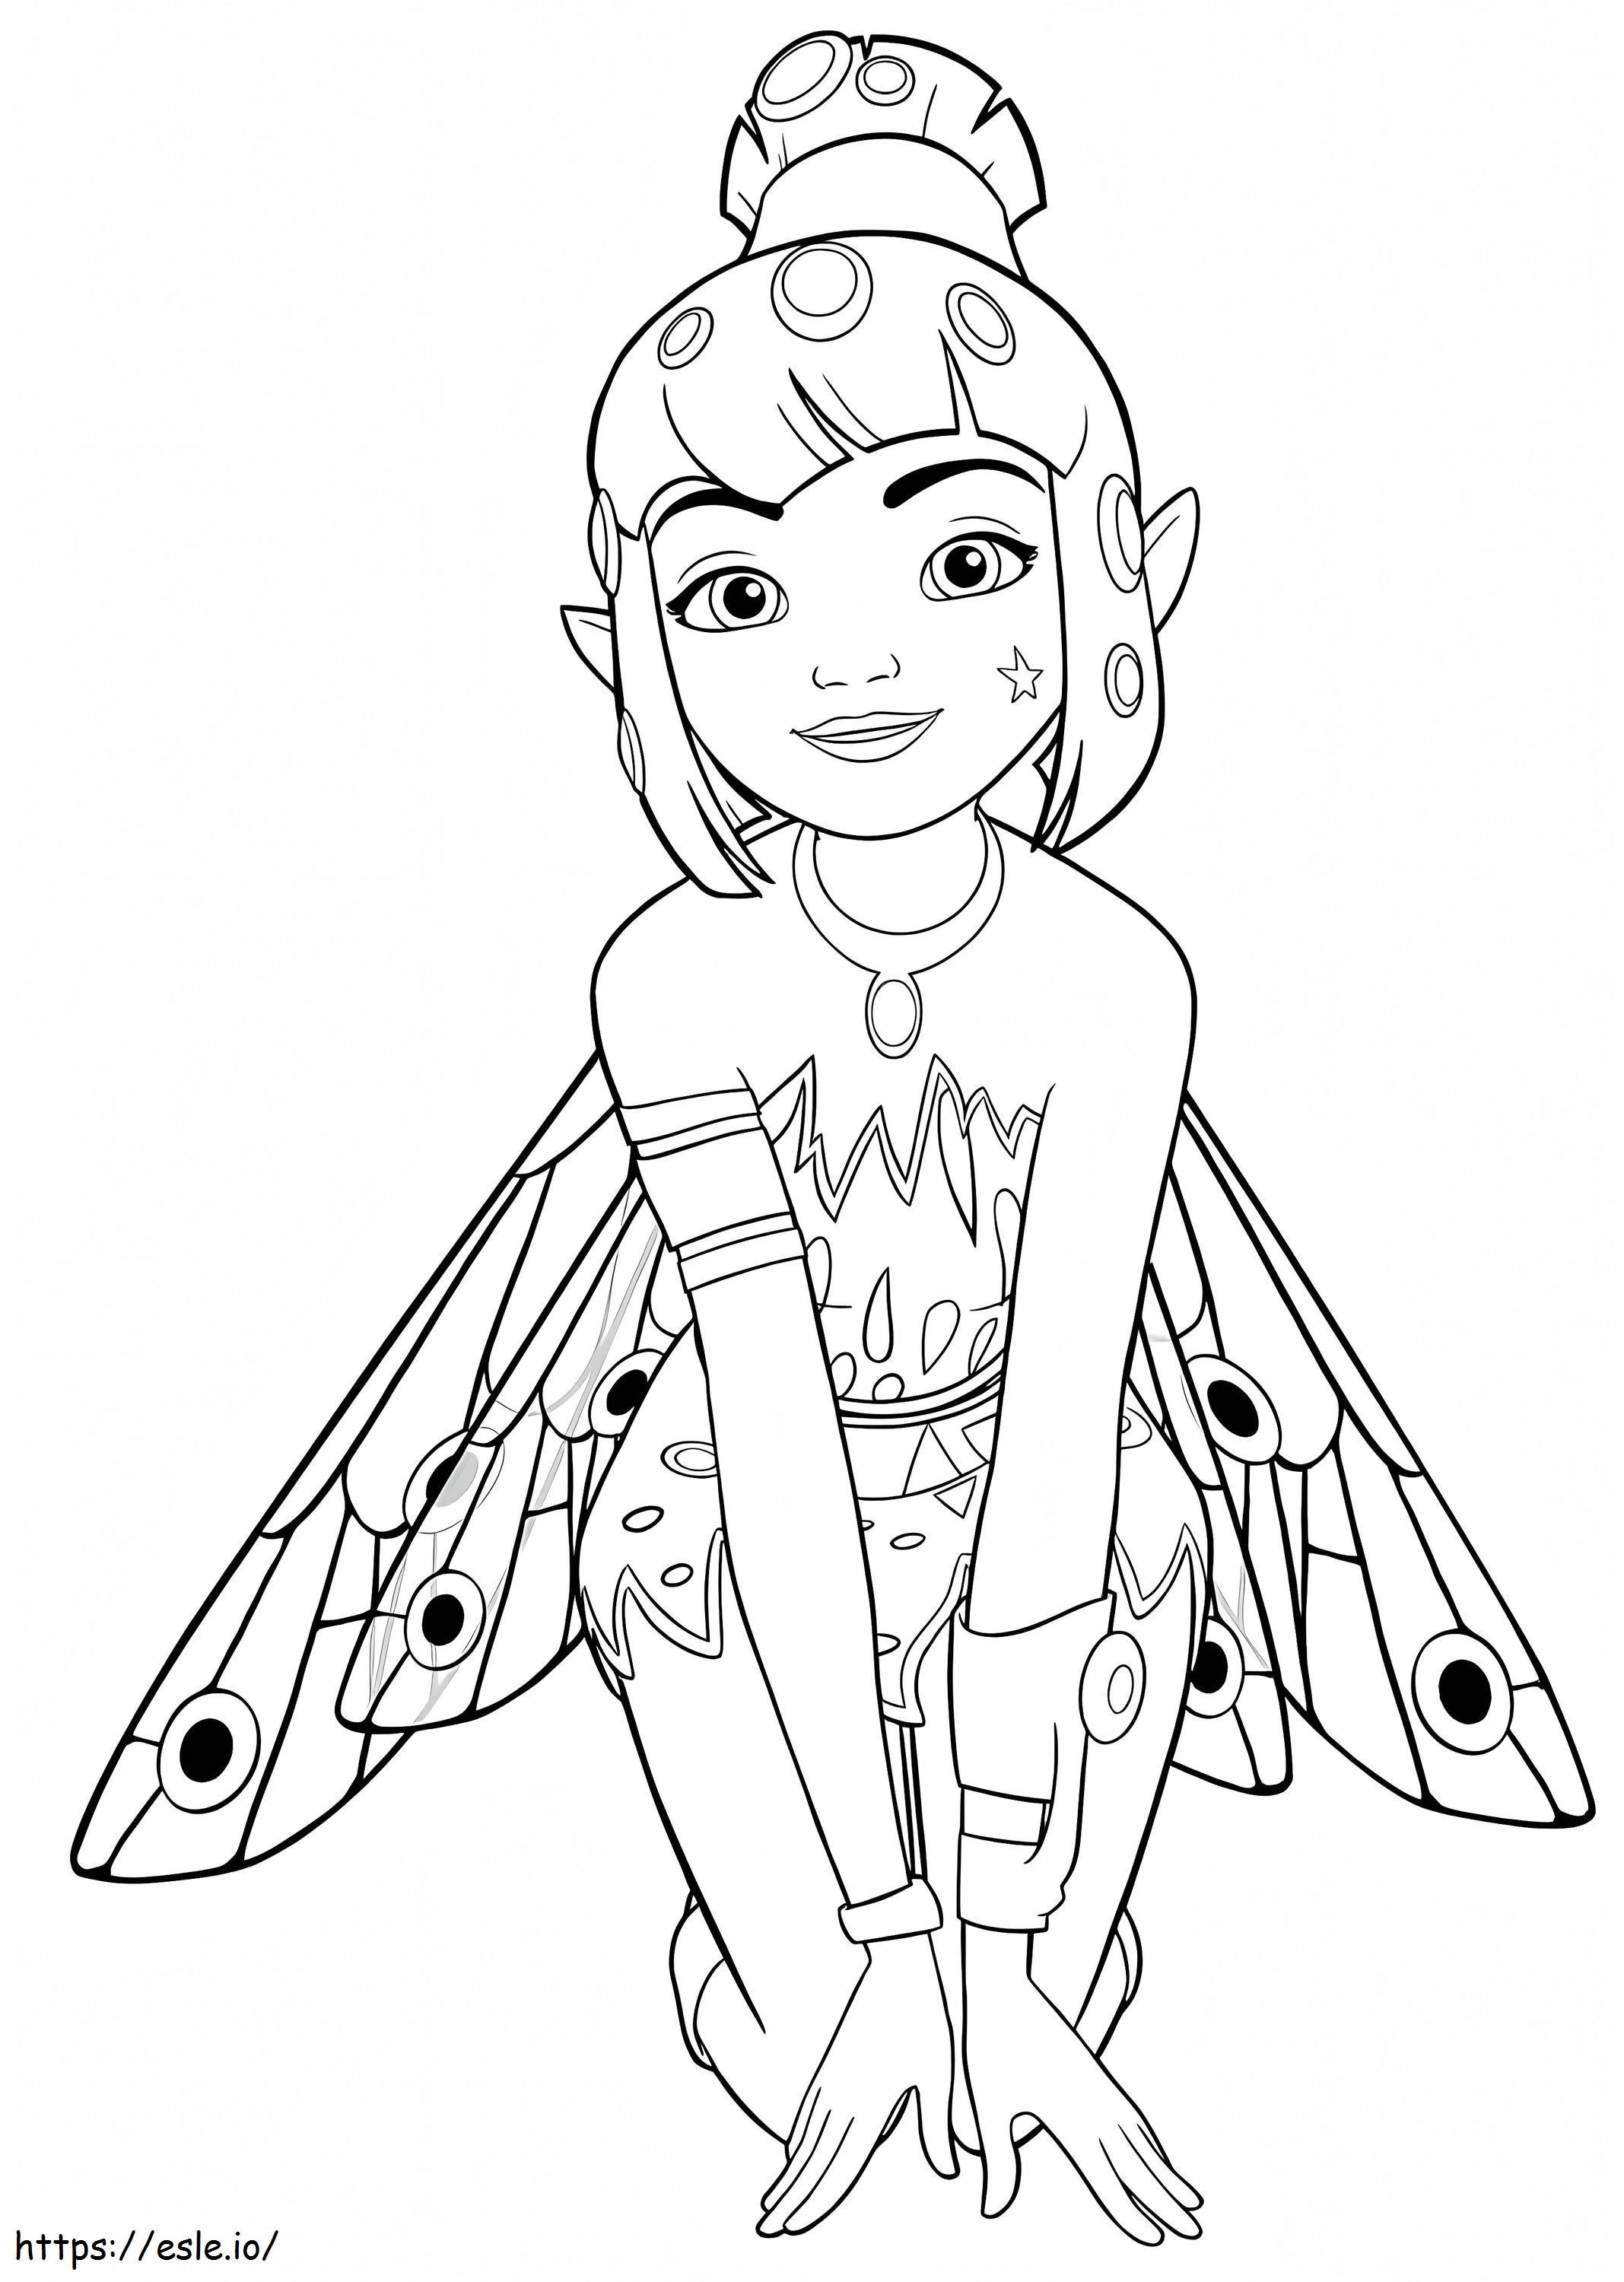 Yuko From Mia And Me coloring page